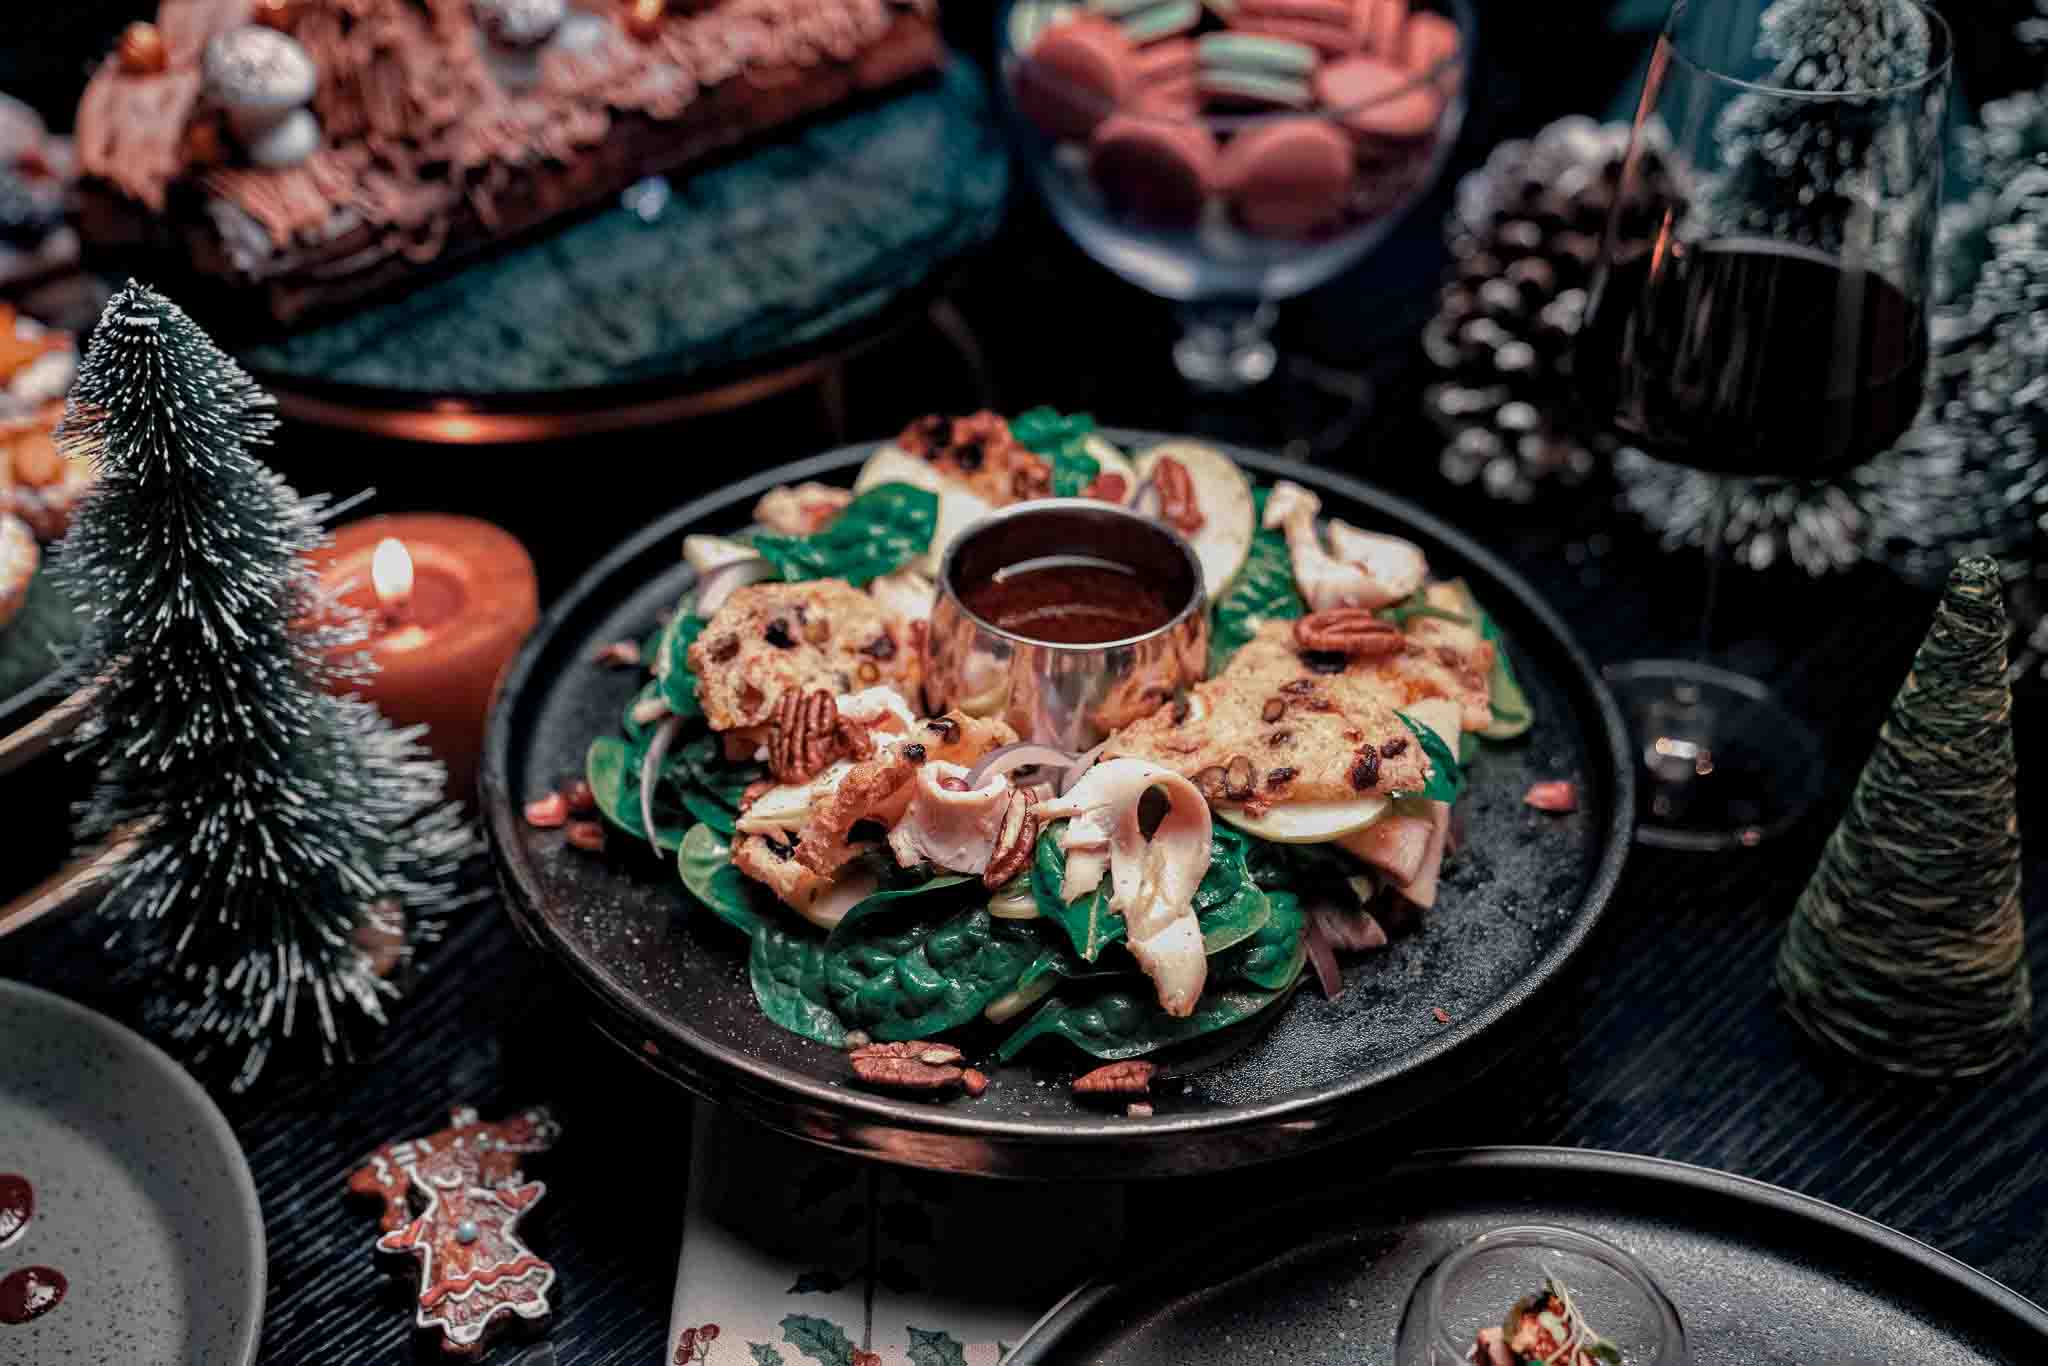 Wondering where to find the best buffet during the merriest holiday season?

Until December 4, enjoy an exclusive 10% discount while you get ahead of the crowd and secure a table at FEAST!

Reservation available at link in bio.

#atEAST #EASTHongKong #EatatEAST #FEAST #ChristmasBuffet #EarlyBird